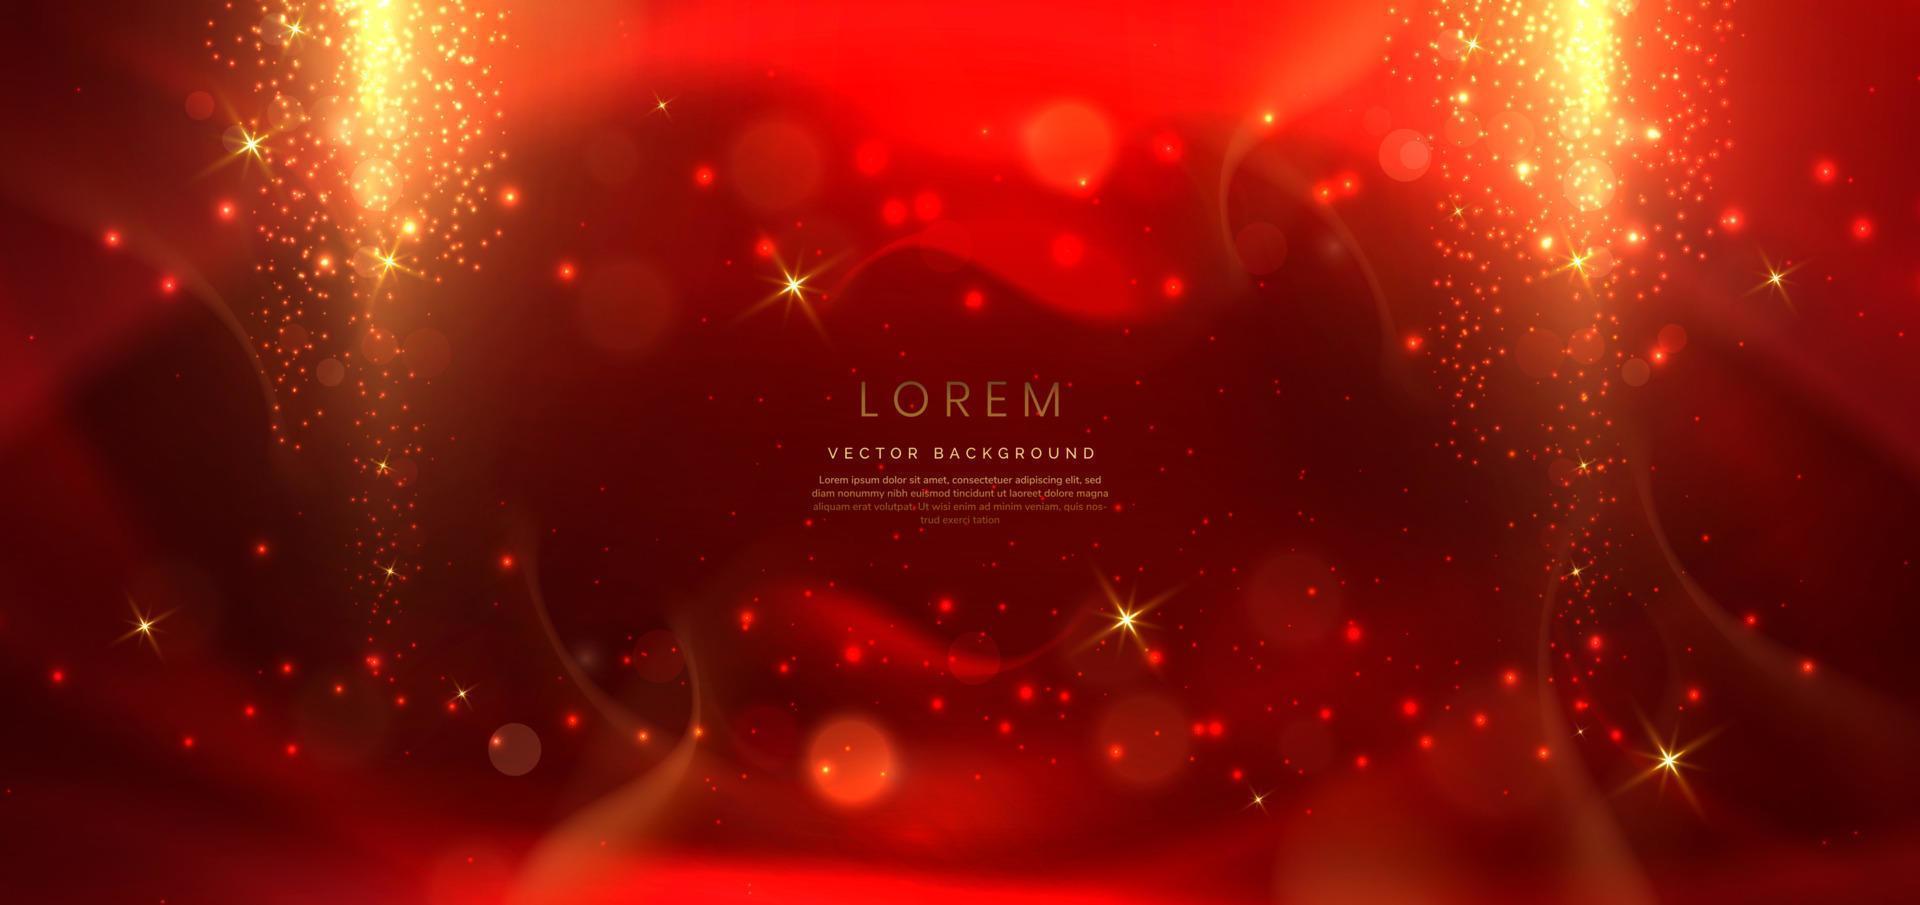 Abstract elegant dark red background with golden glowing effect. Template premium award design. vector